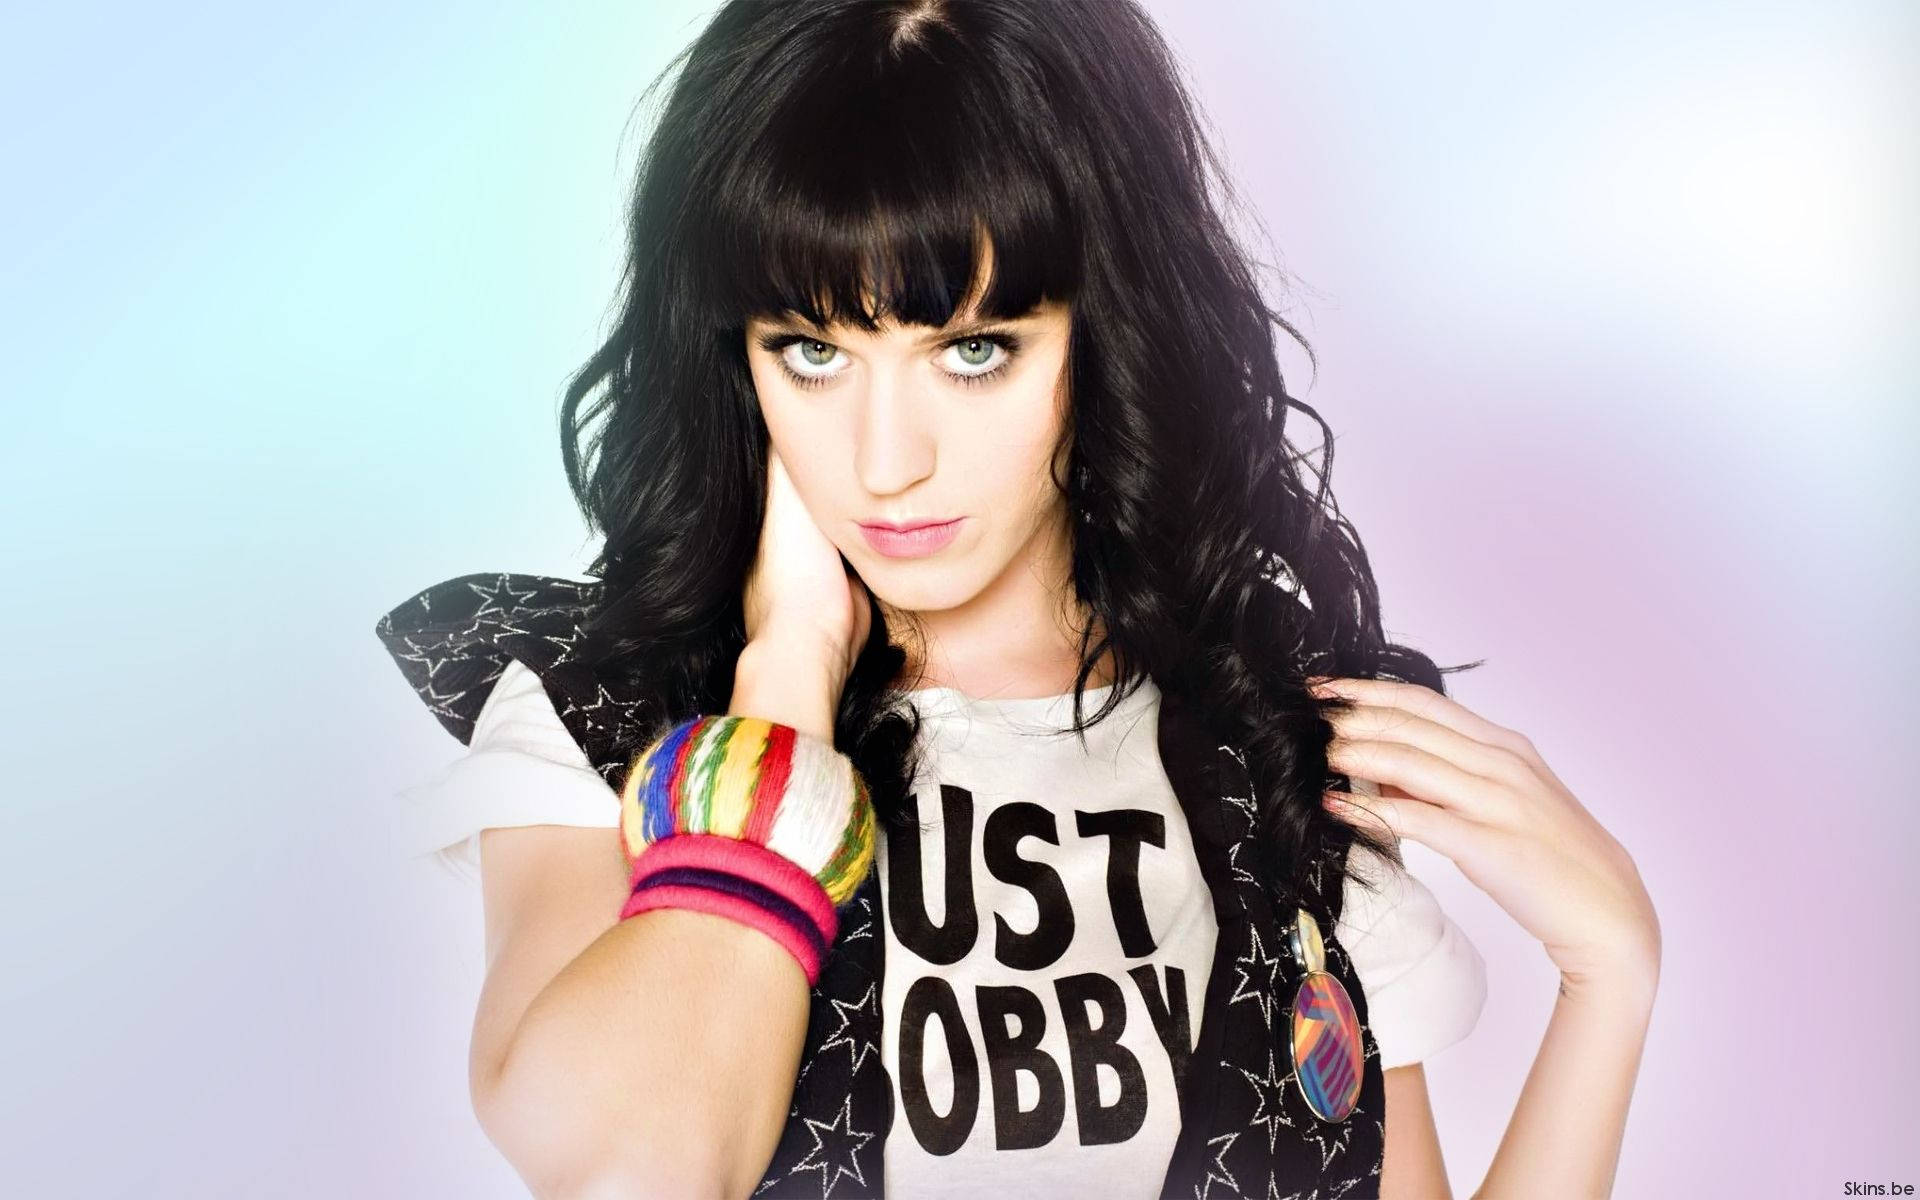 Image Singer And Songwriter Katy Perry Background